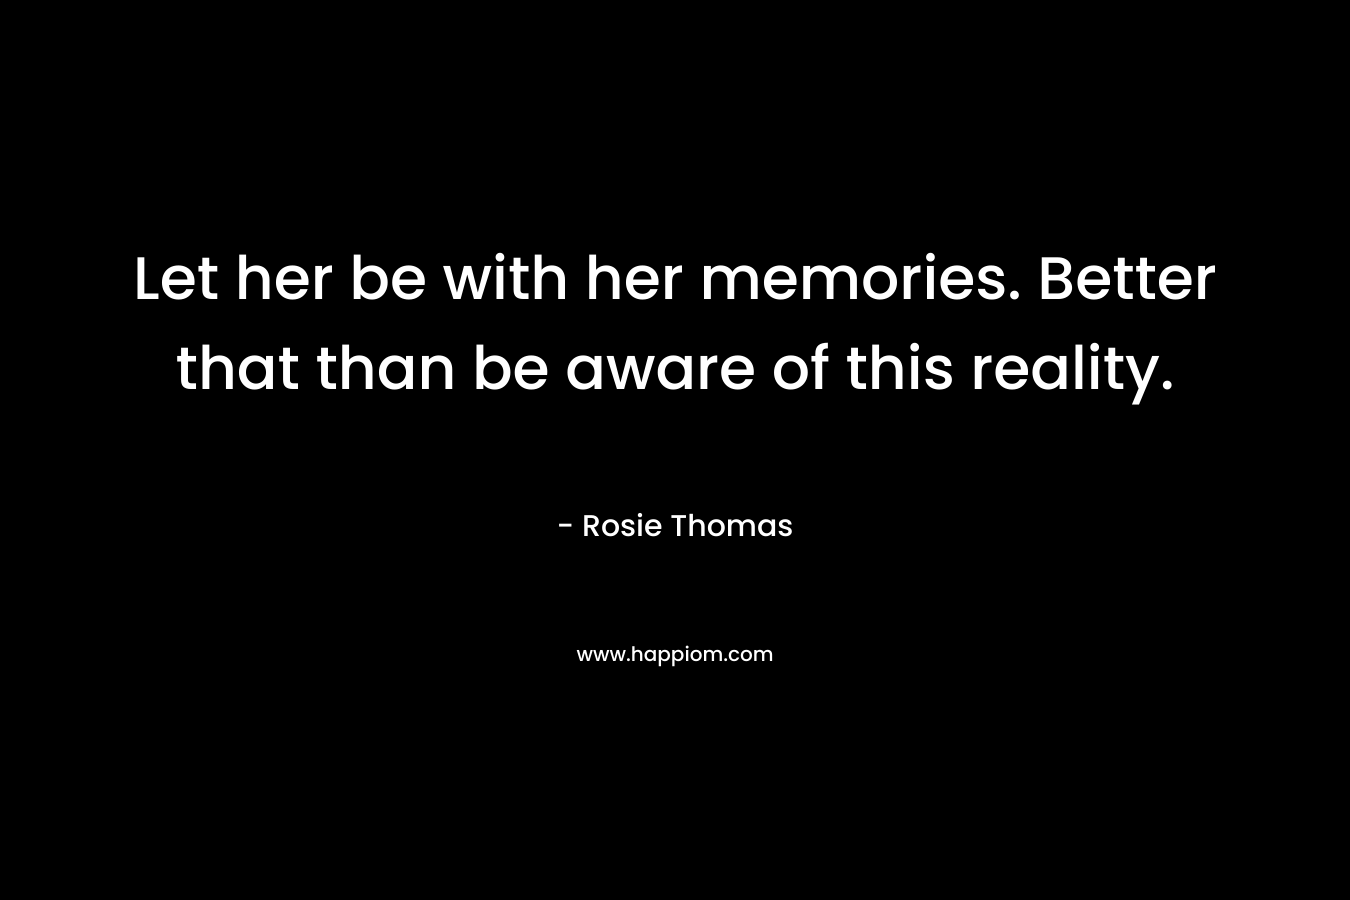 Let her be with her memories. Better that than be aware of this reality.